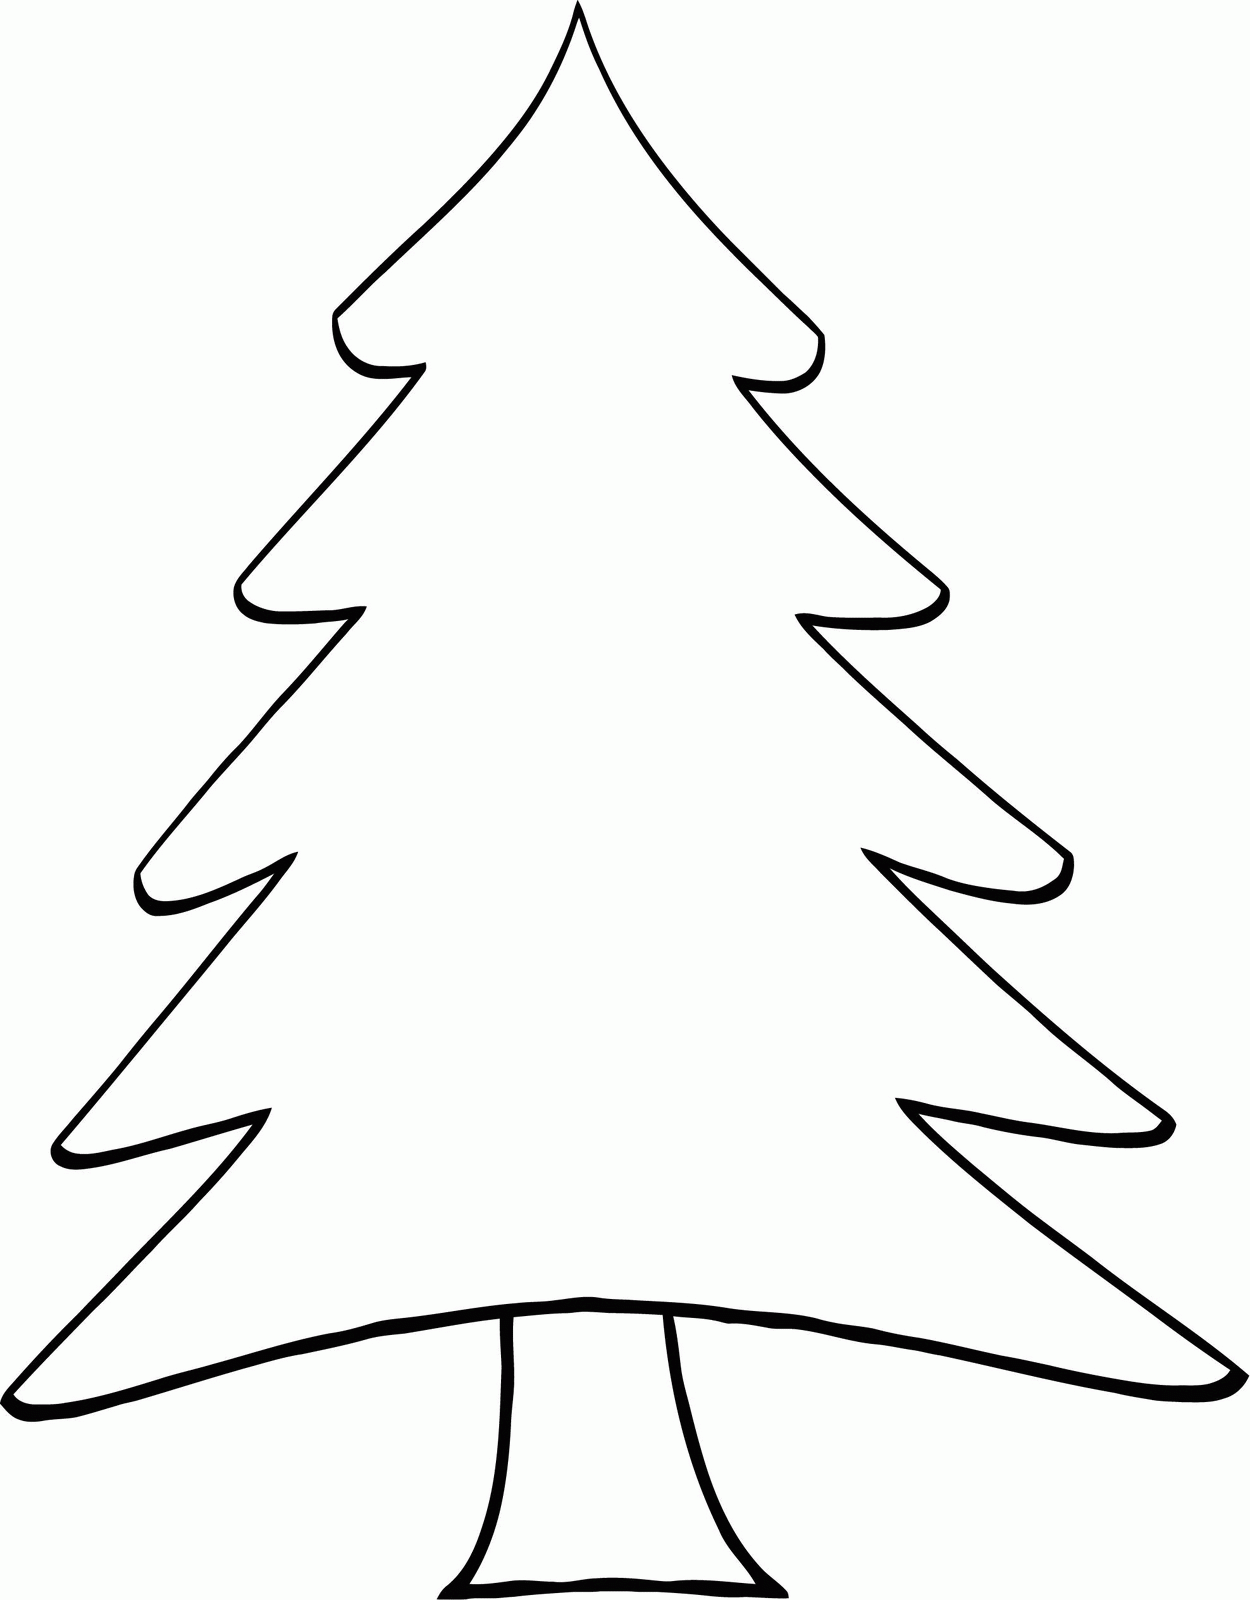 Pine Tree Outline - Coloring Pages for Kids and for Adults